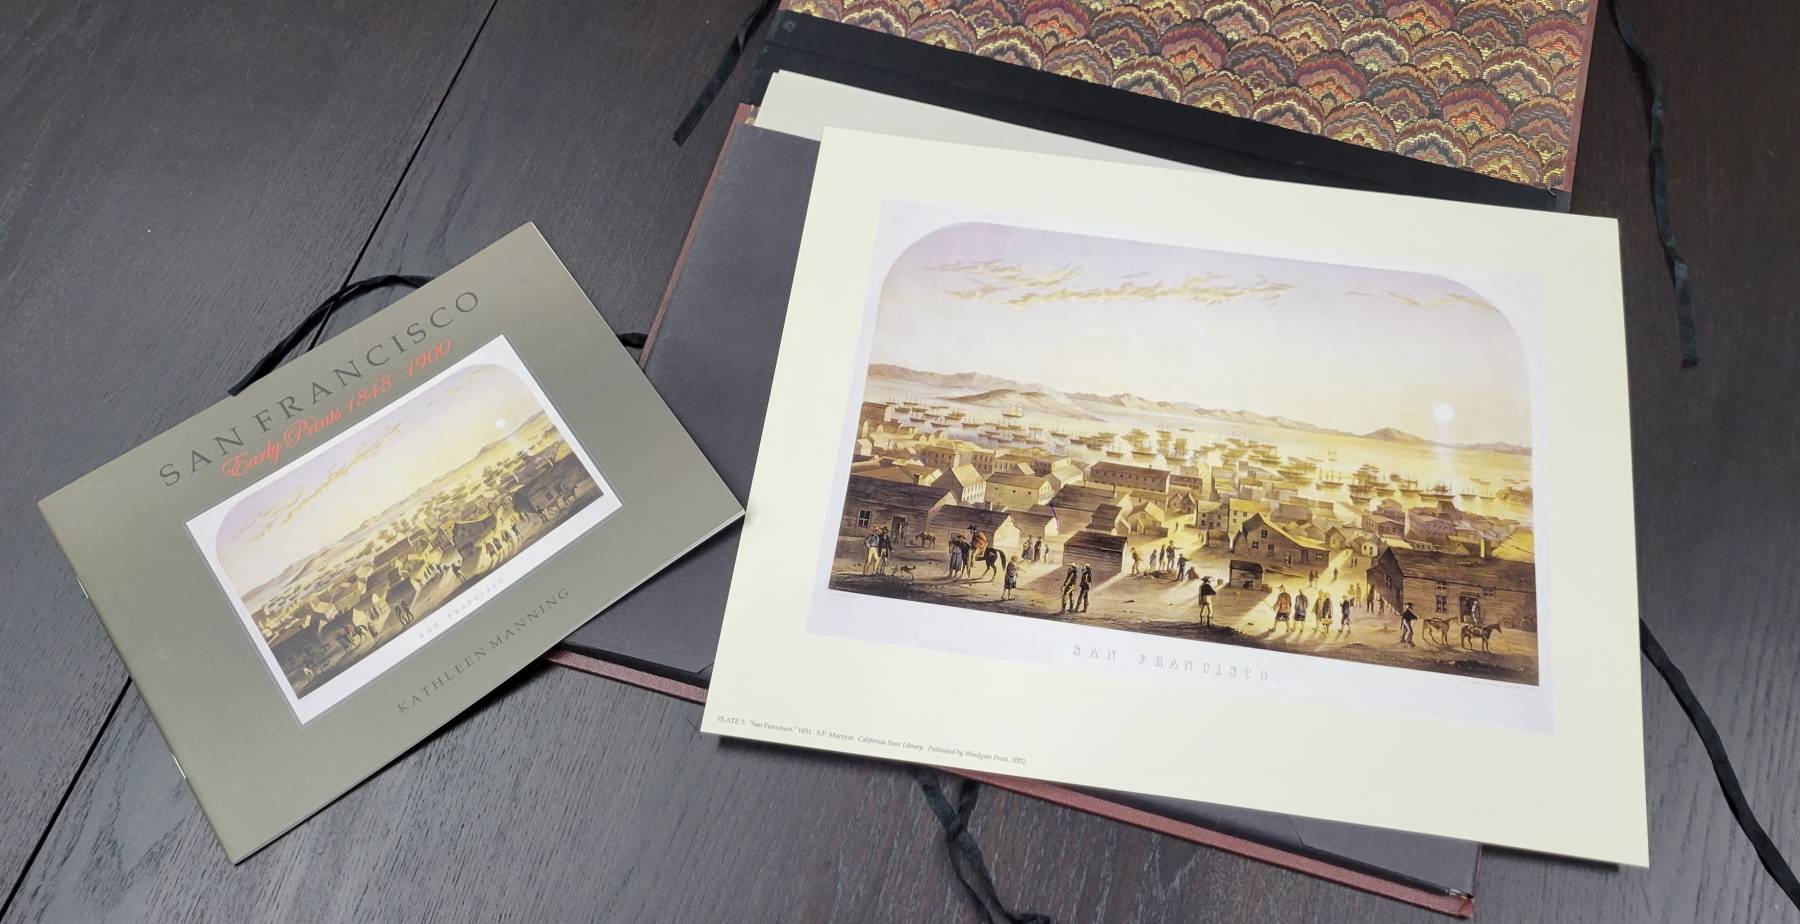 Historic Prints of San Francisco Portfolio (20 Lithograph Reproductions and Booklet) - Limited Edition Printing